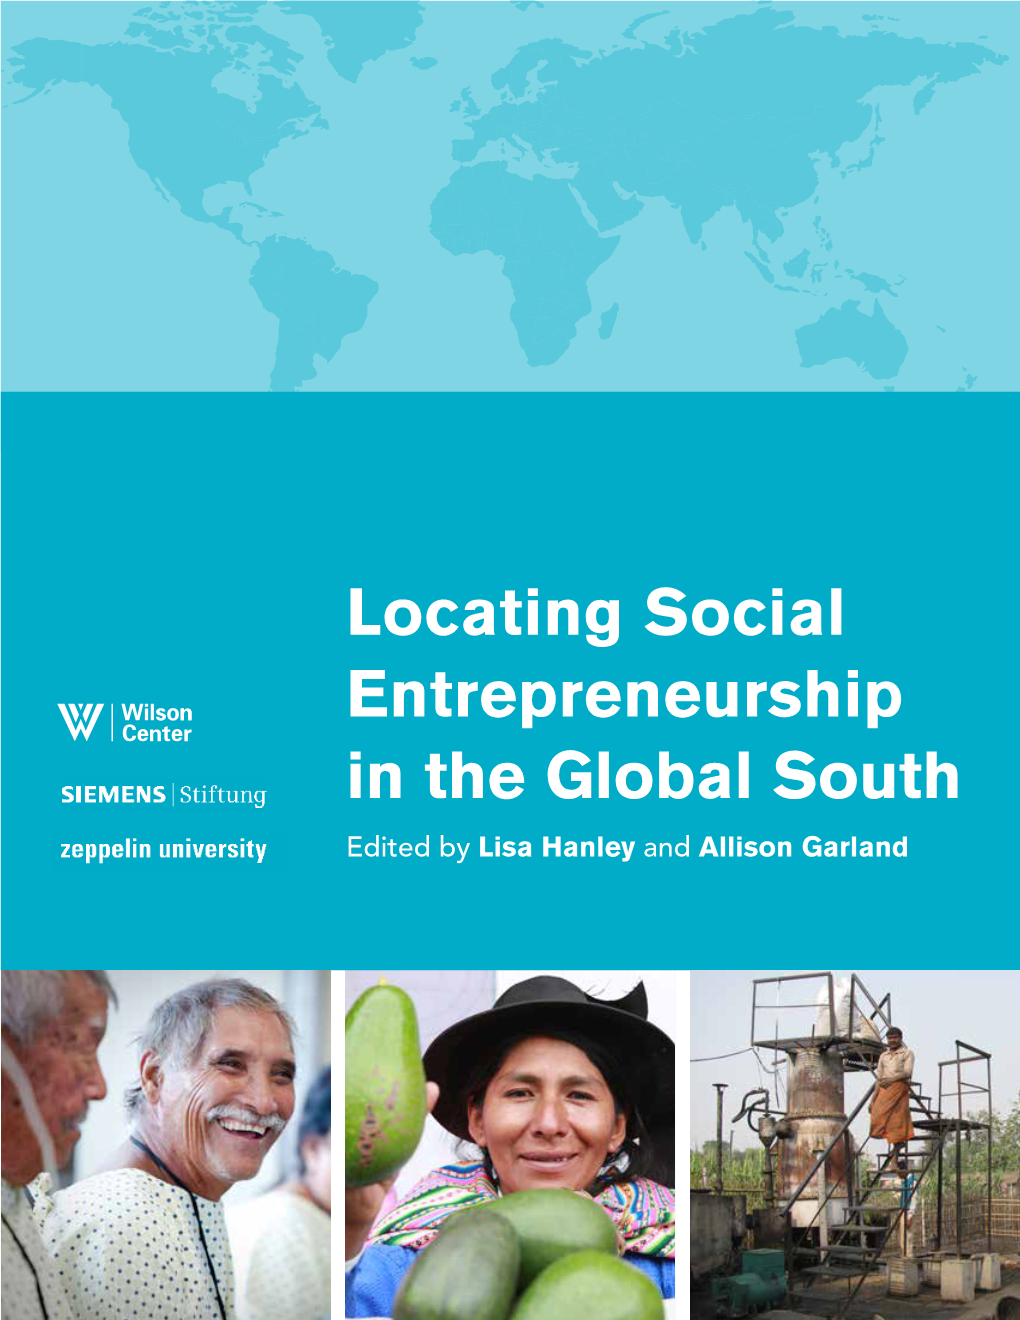 Locating Social Entrepreneurship in the Global South Edited by Lisa Hanley and Allison Garland Contents